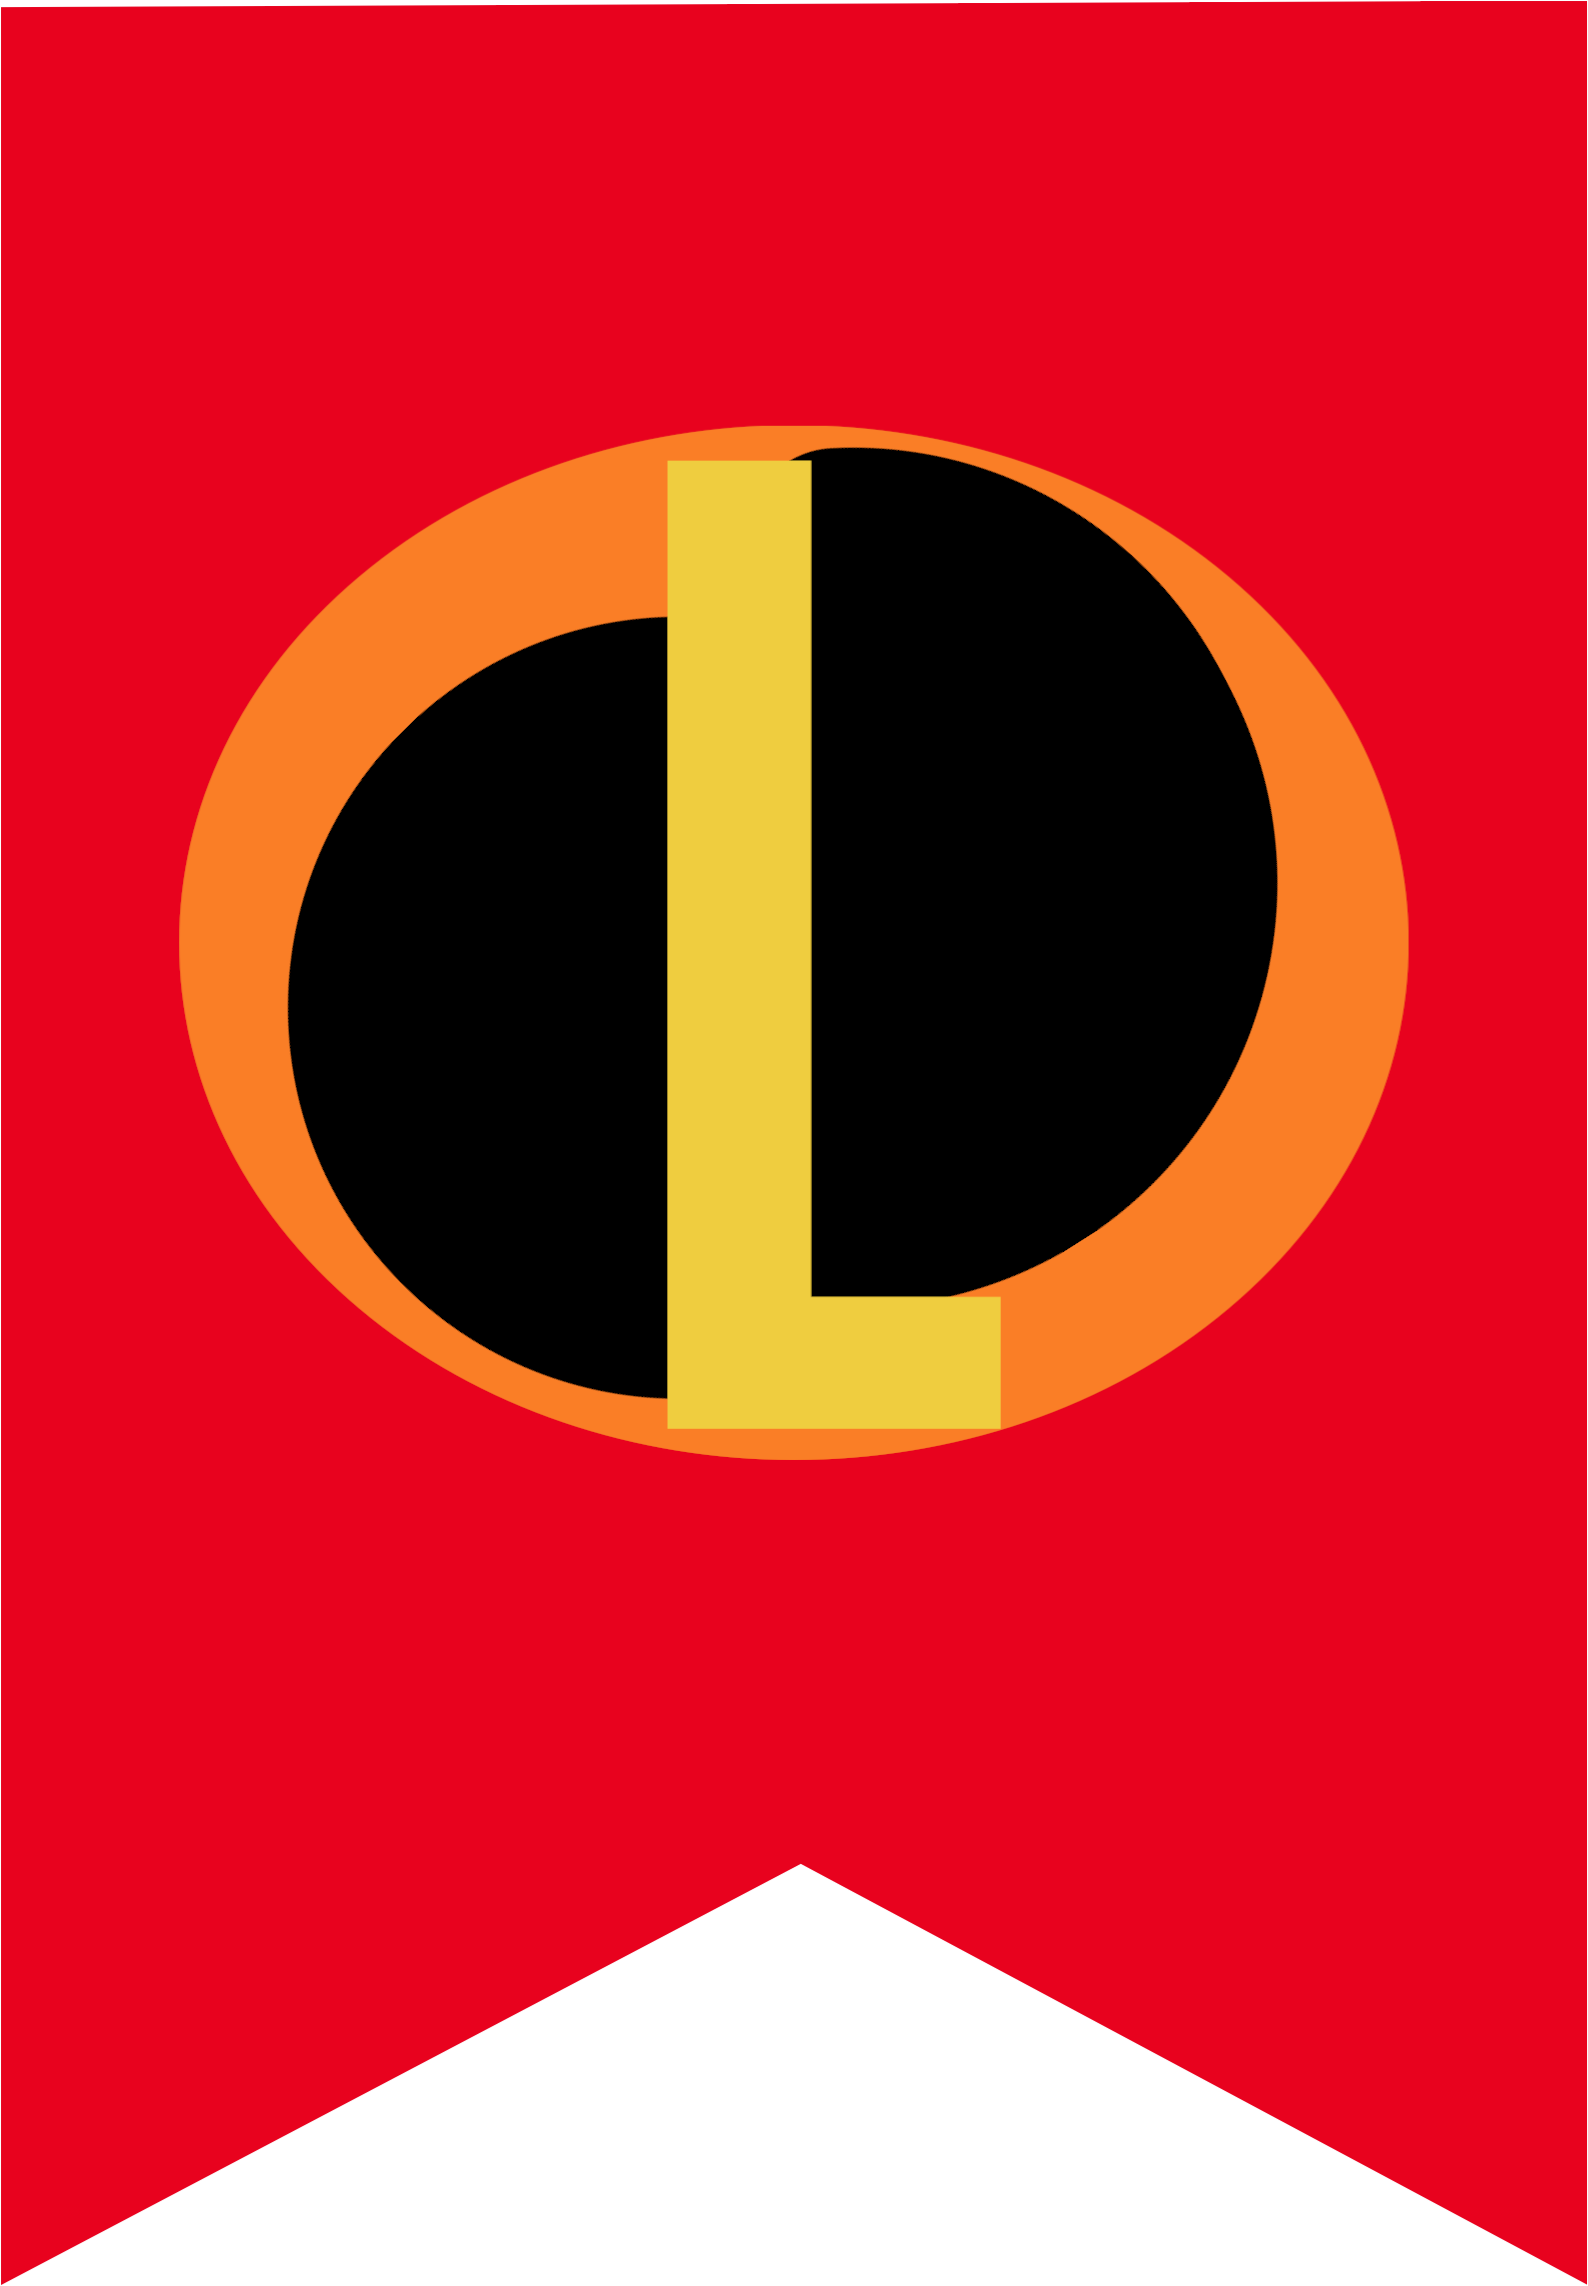 A Red And Black Banner With A Letter L In The Middle